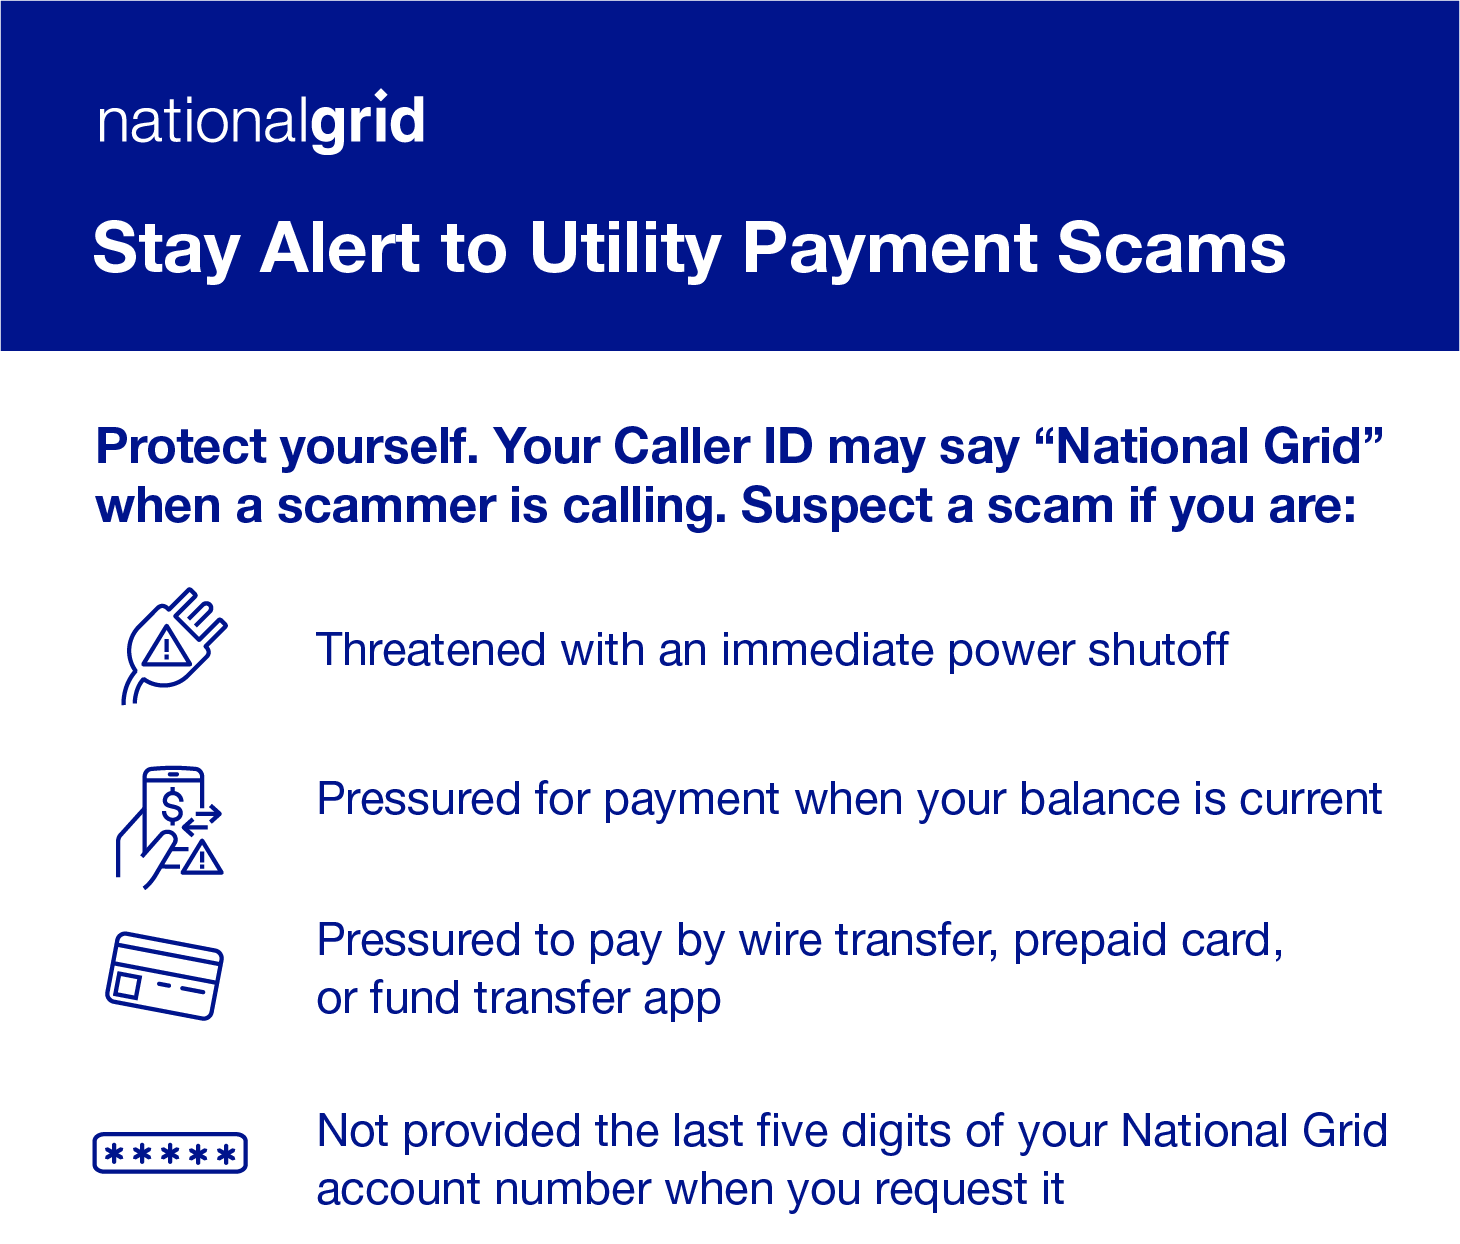 https://www.nationalgridus.com/media/photography/responsive-design-photos/our-company/utility-payment-scams2.png